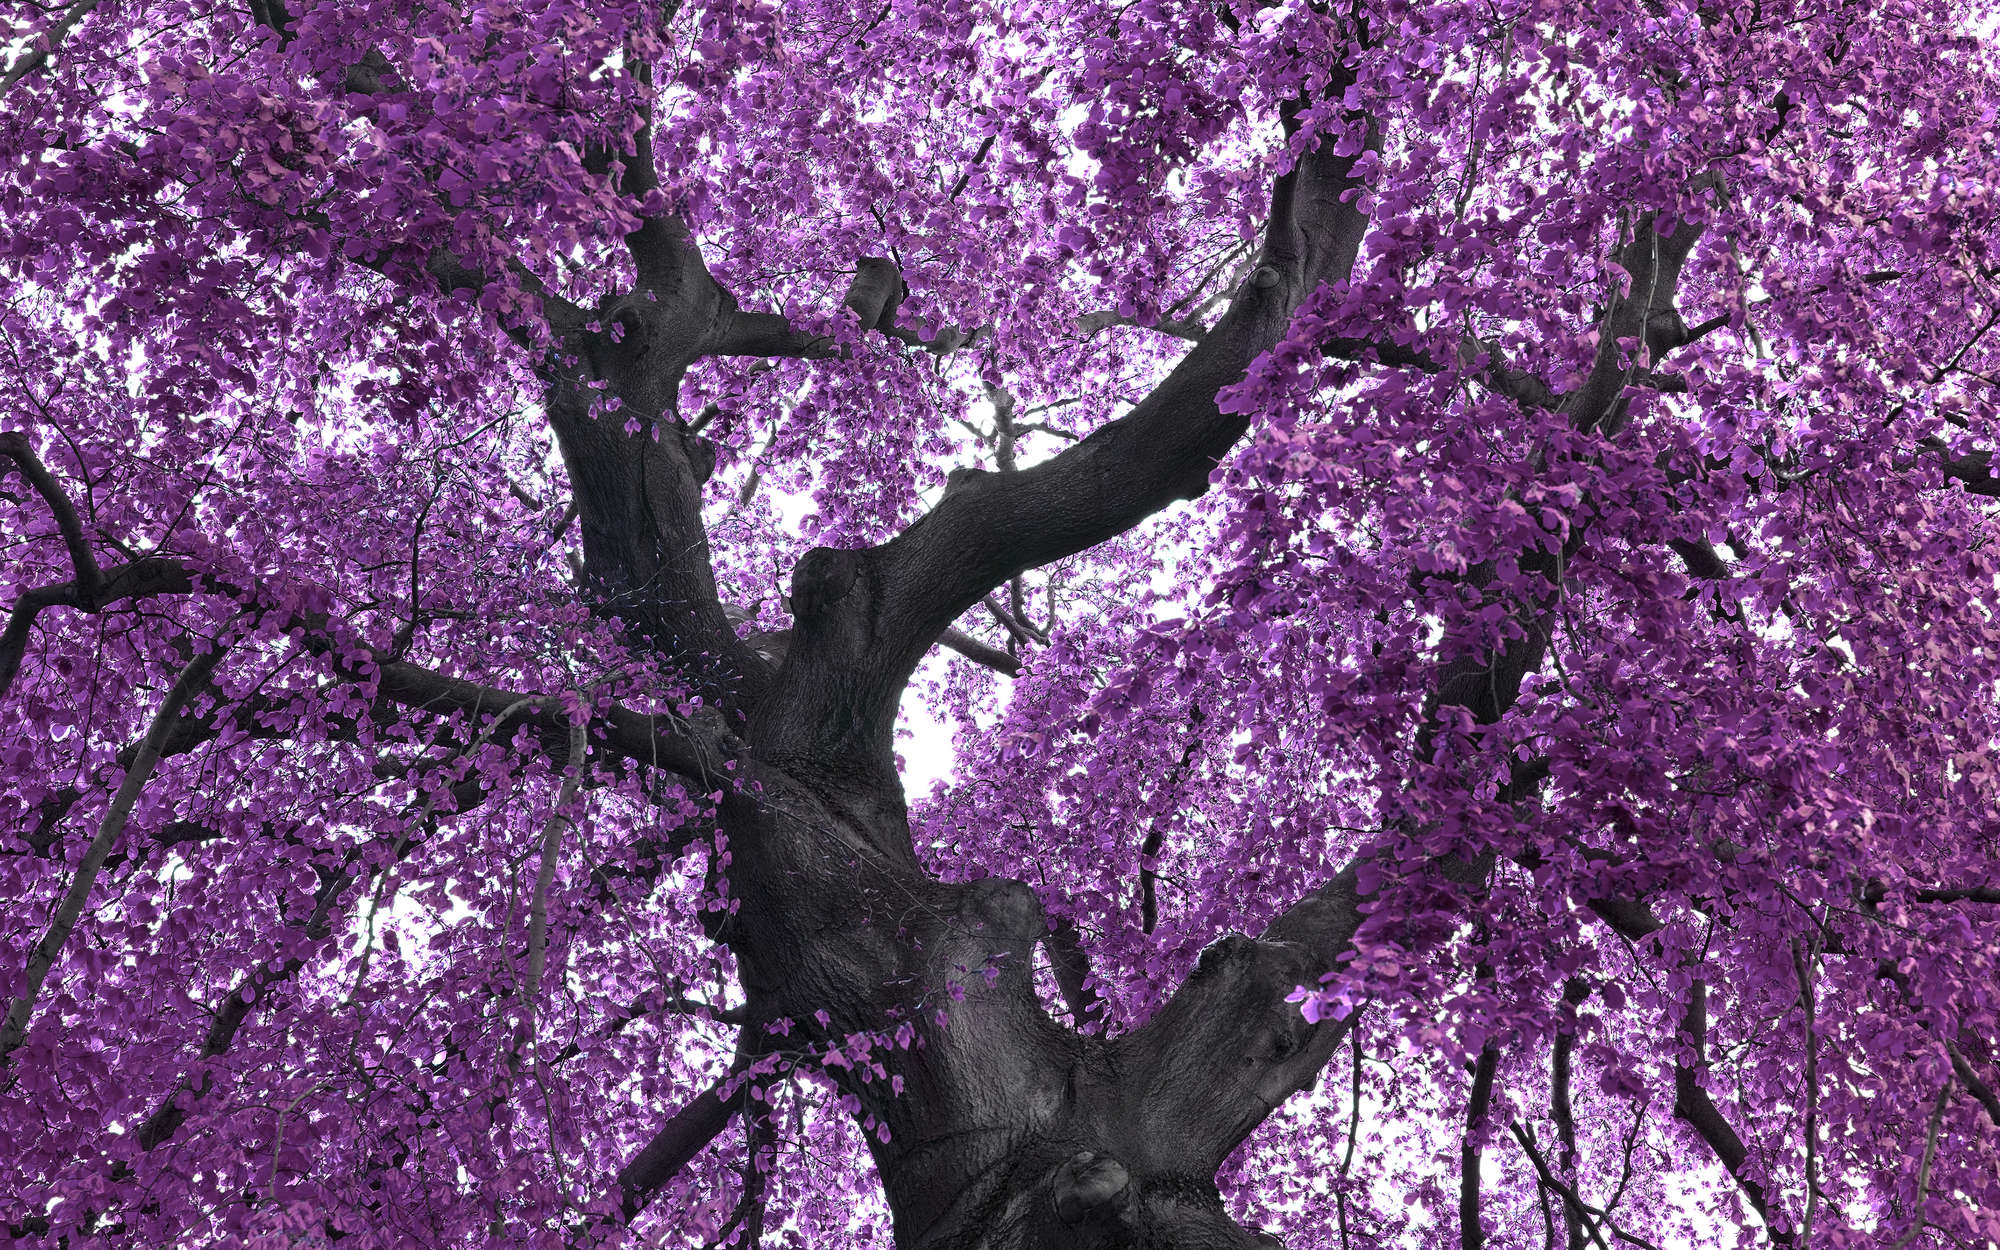             Photo wallpaper tree with purple treetop - pearlescent smooth fleece
        